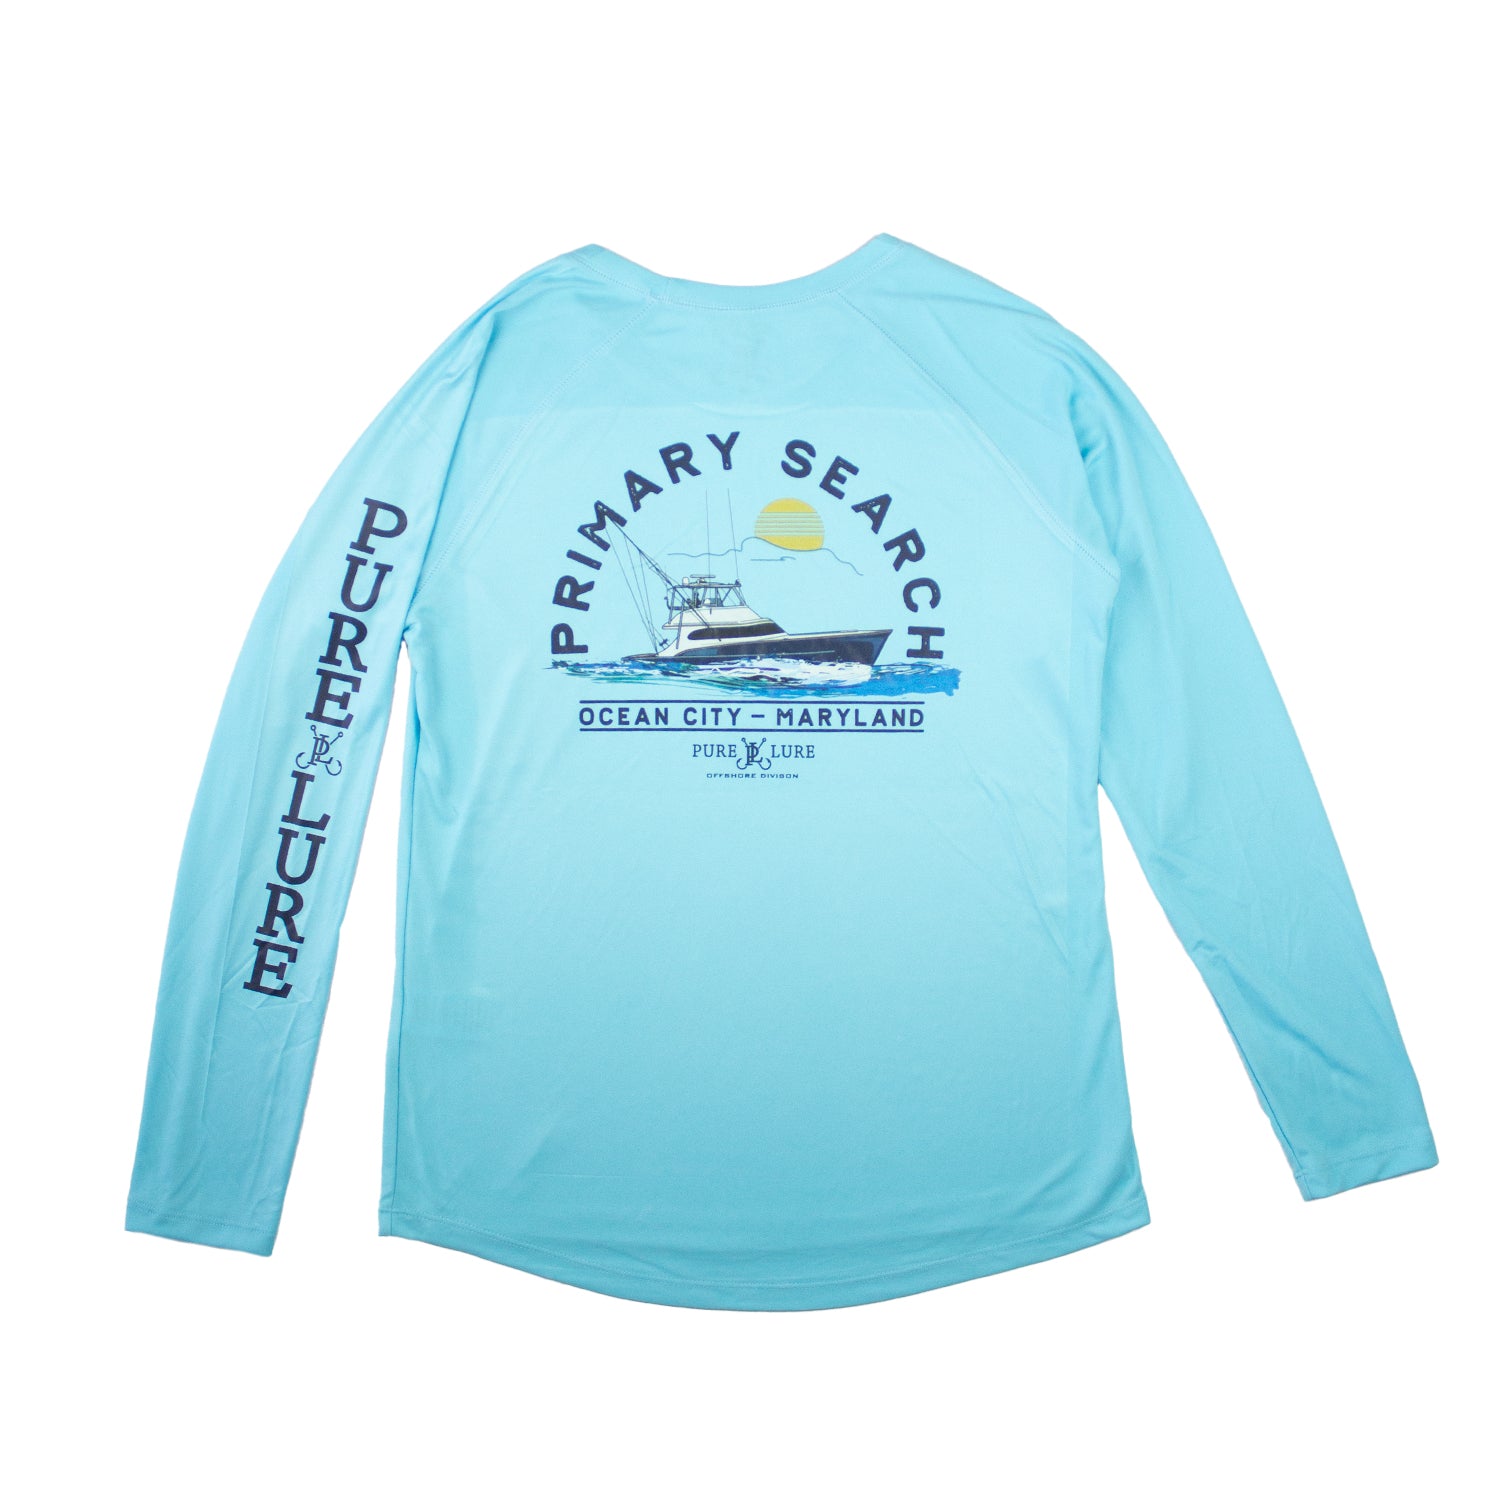 Primary Search Women's Performance Shirt